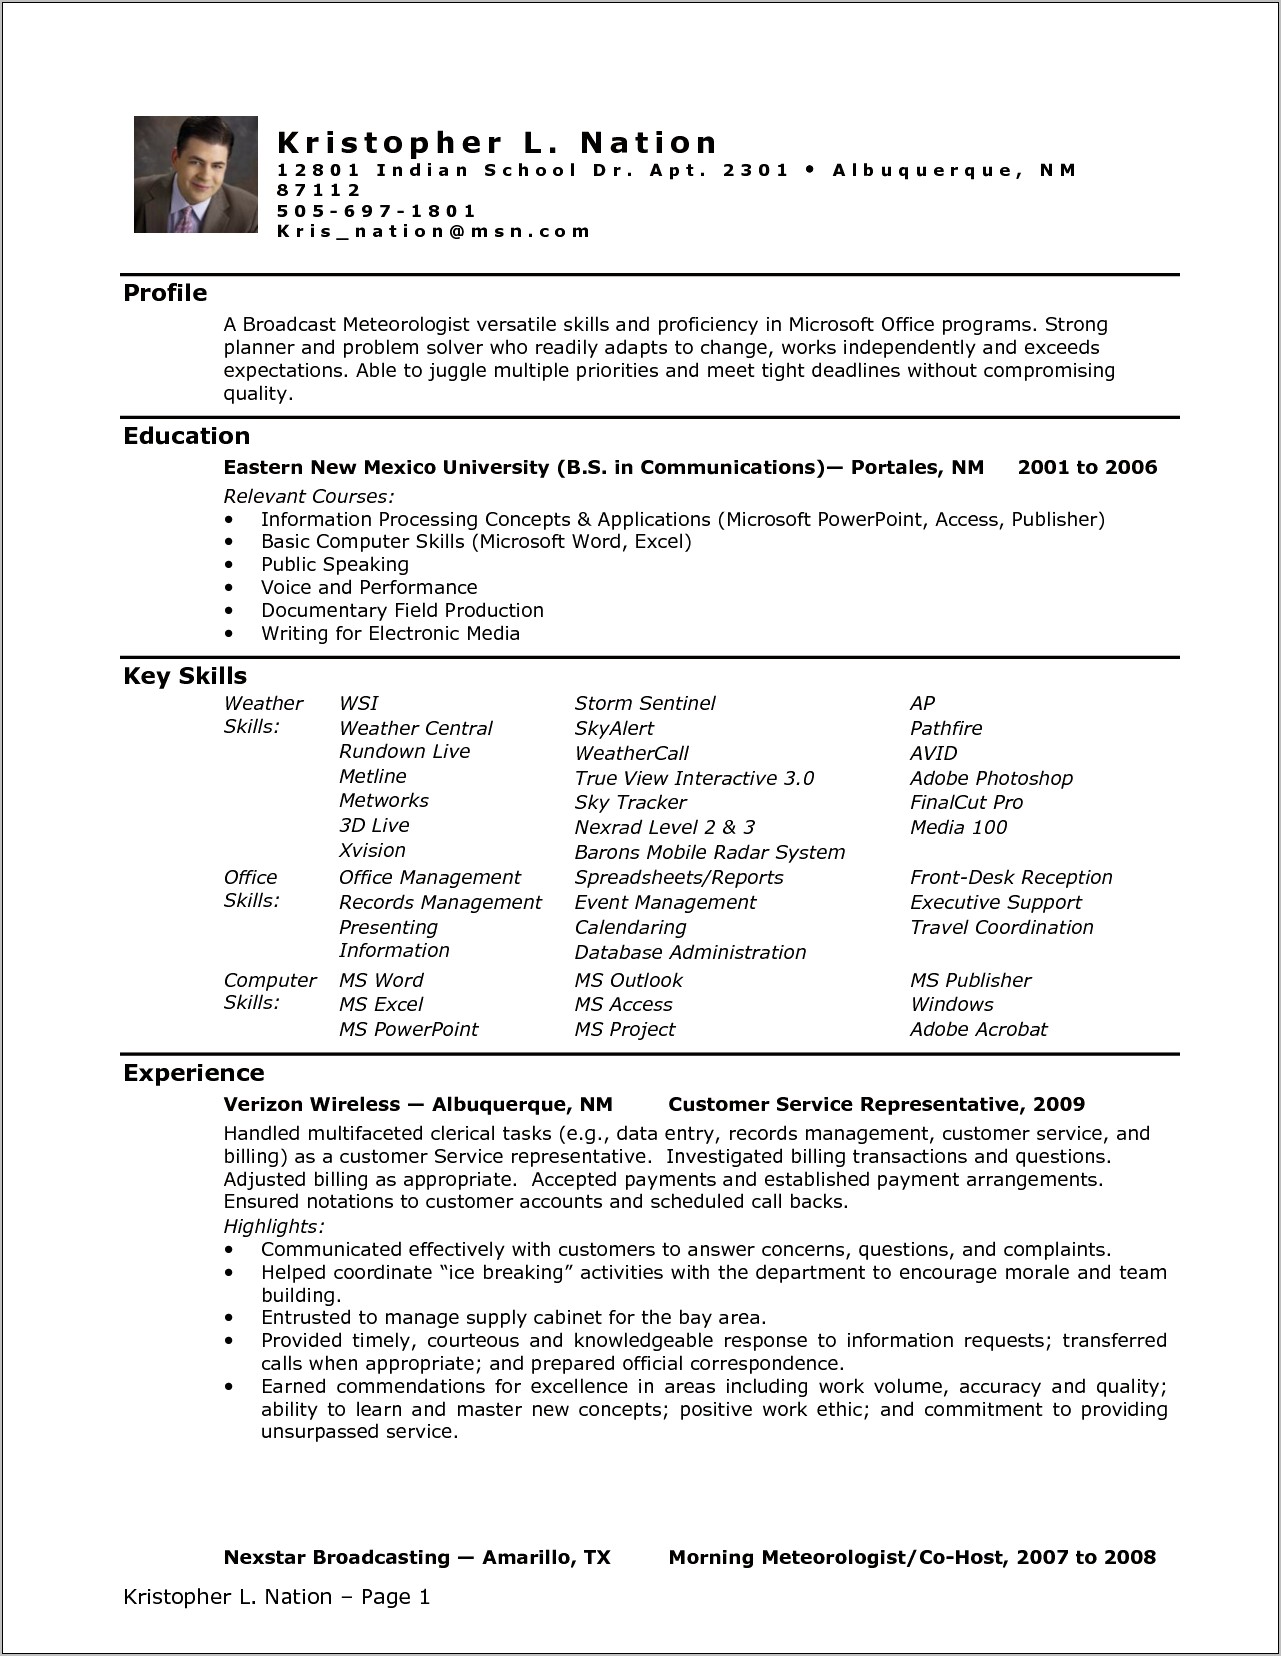 Resume Objective Healthcare Administrative Assistant